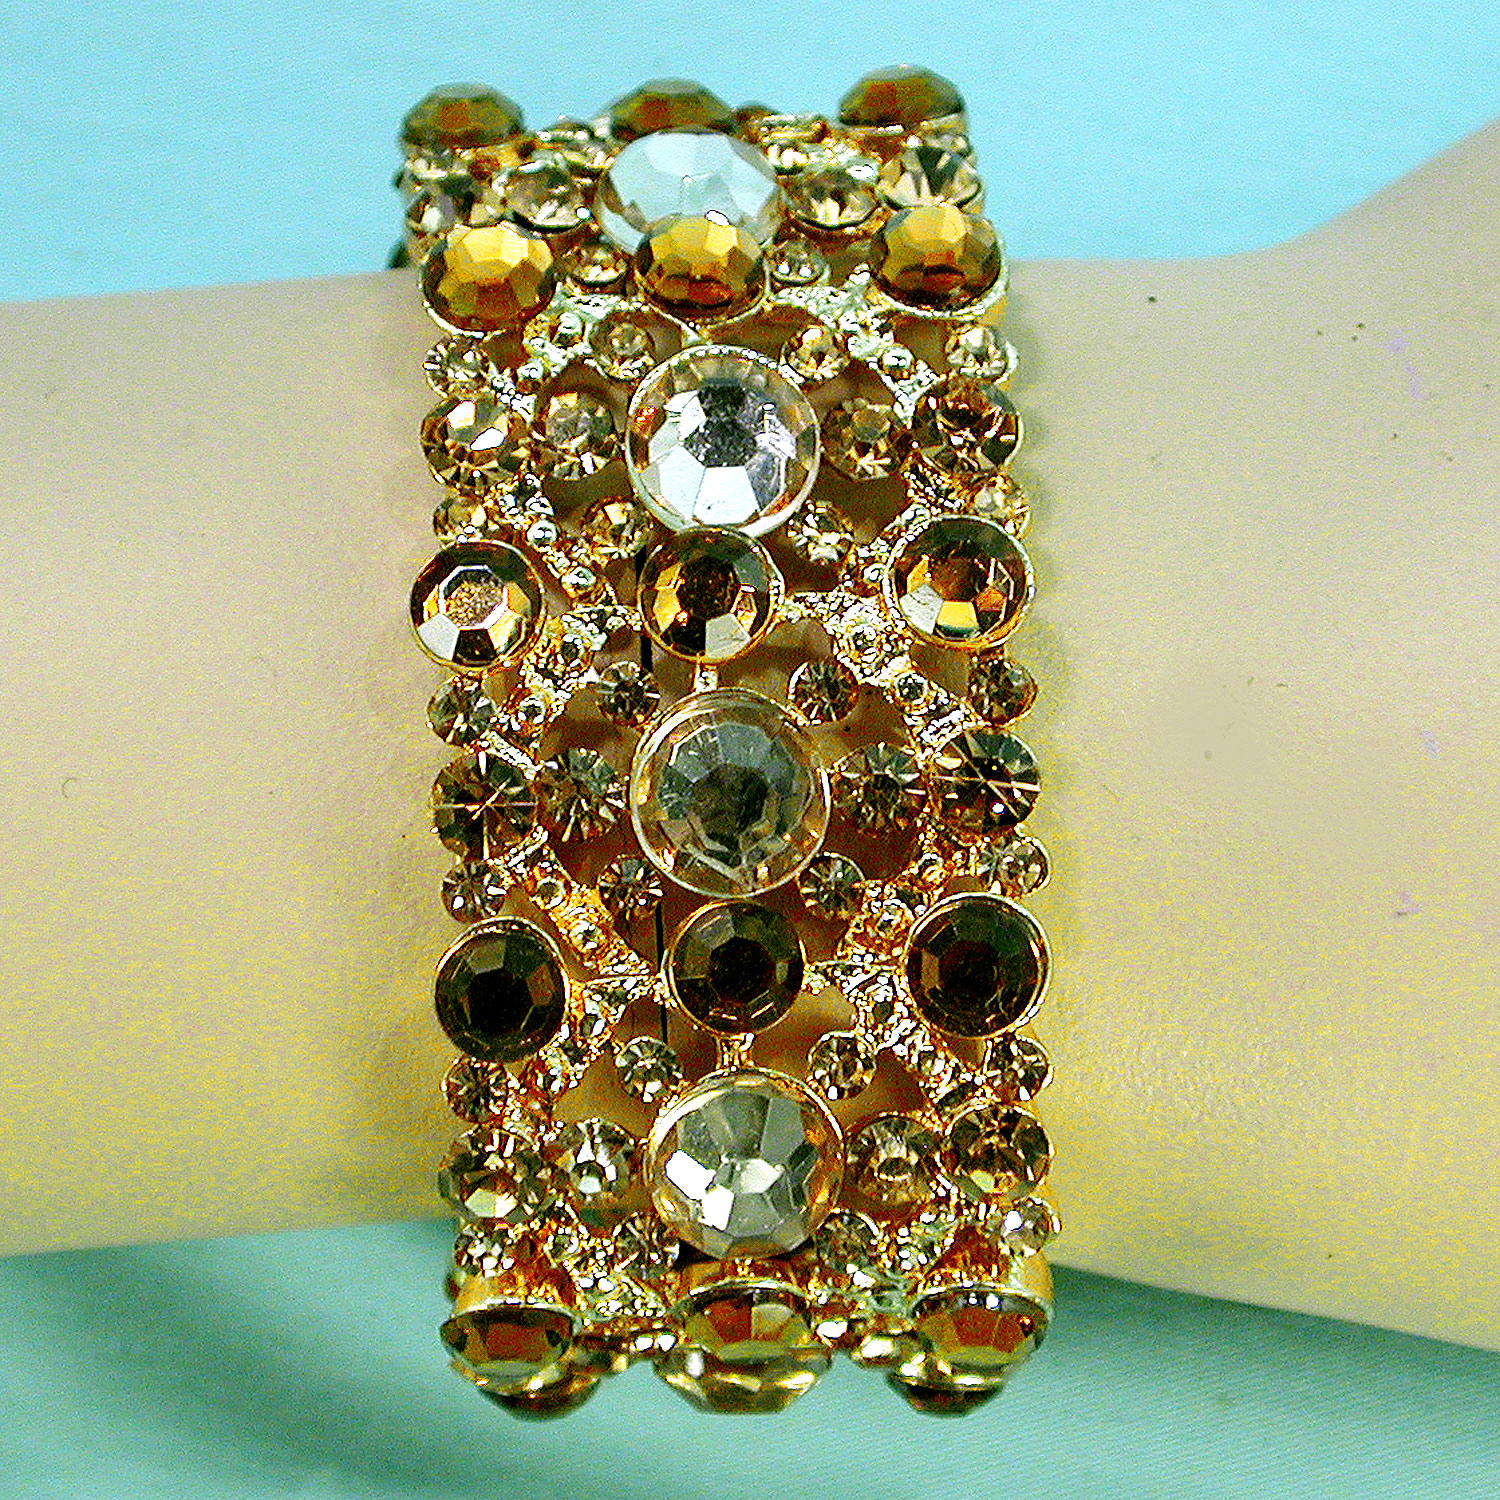 Gold, Champagne and Amber Crystal Rhinestone Bracelet, a fashion accessorie - Evening Elegance